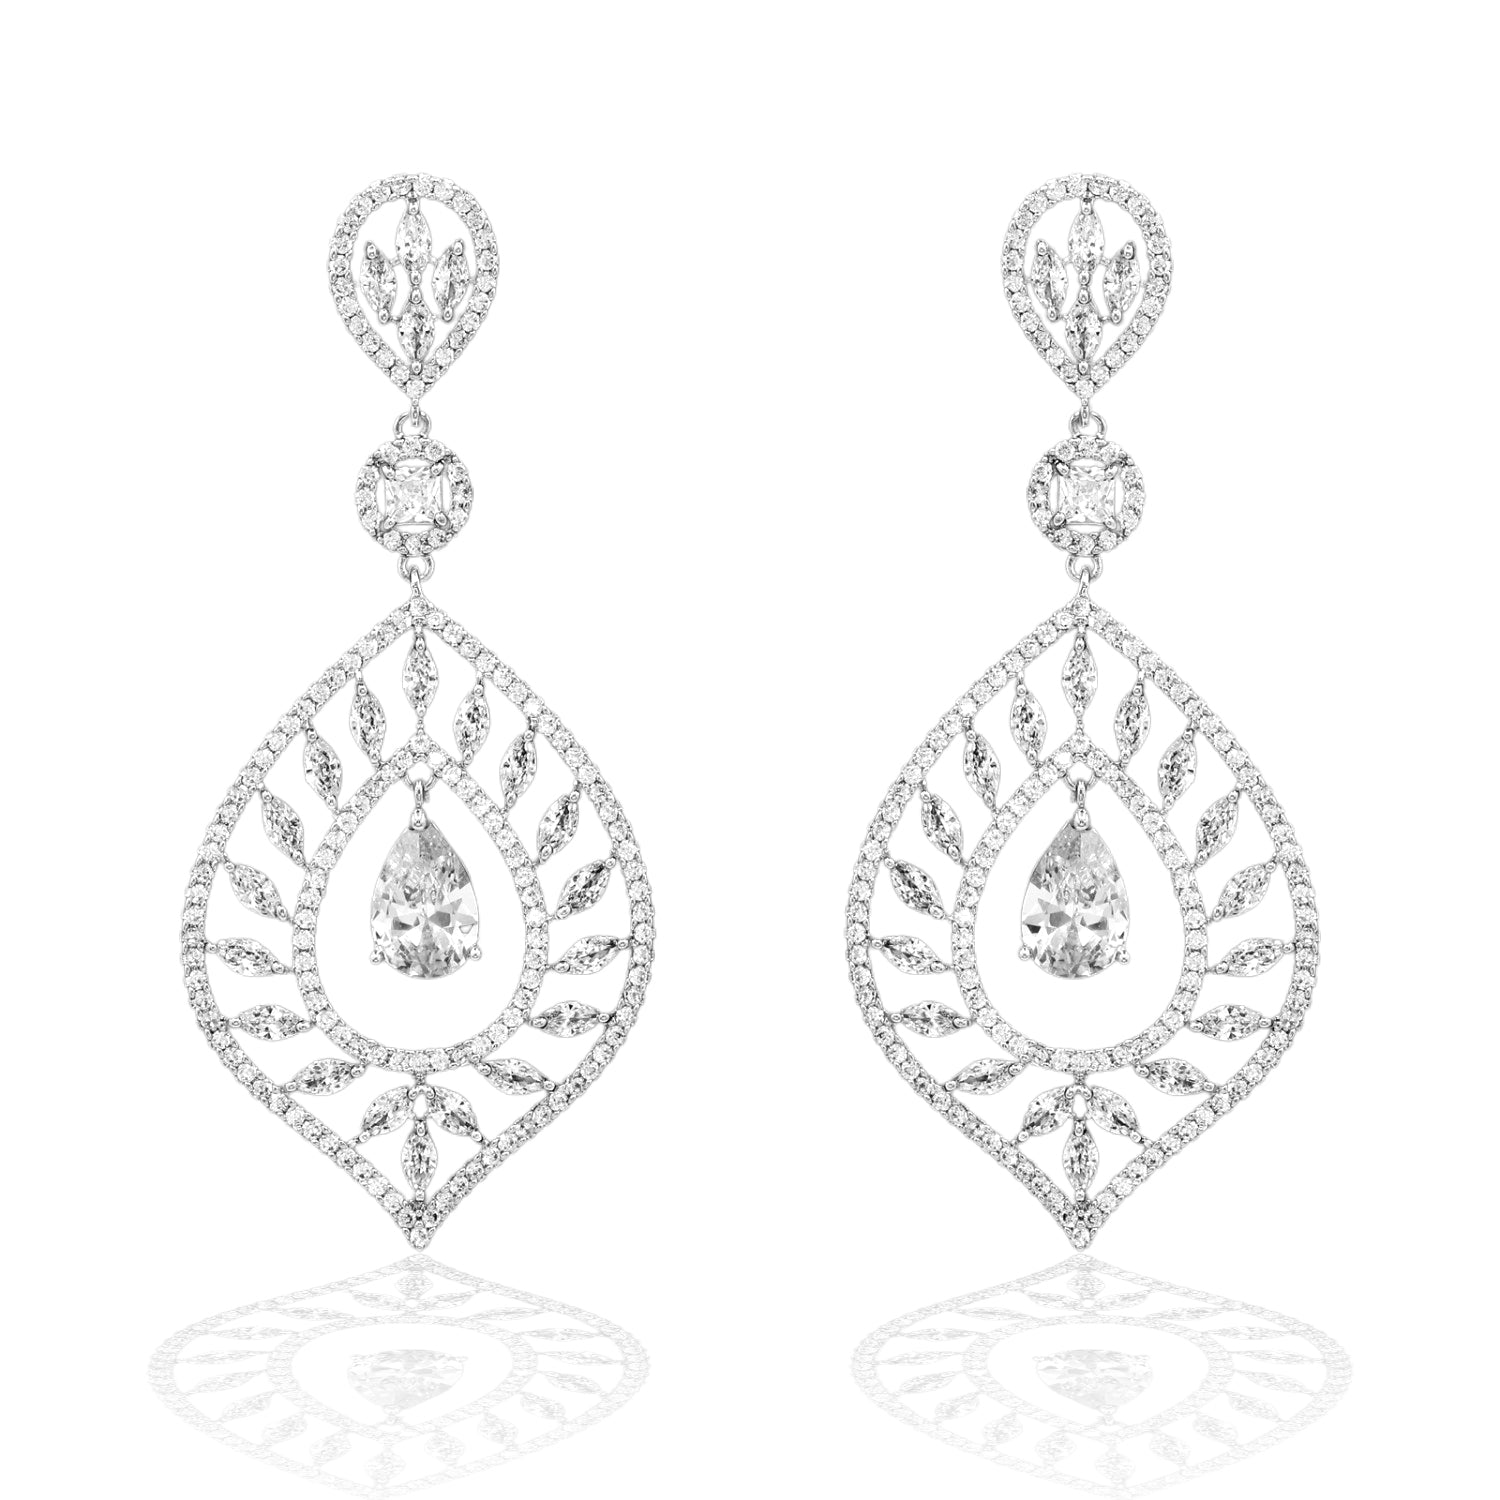 Unique Marquise Layered Earrings in CZ - Cassandra Lynne